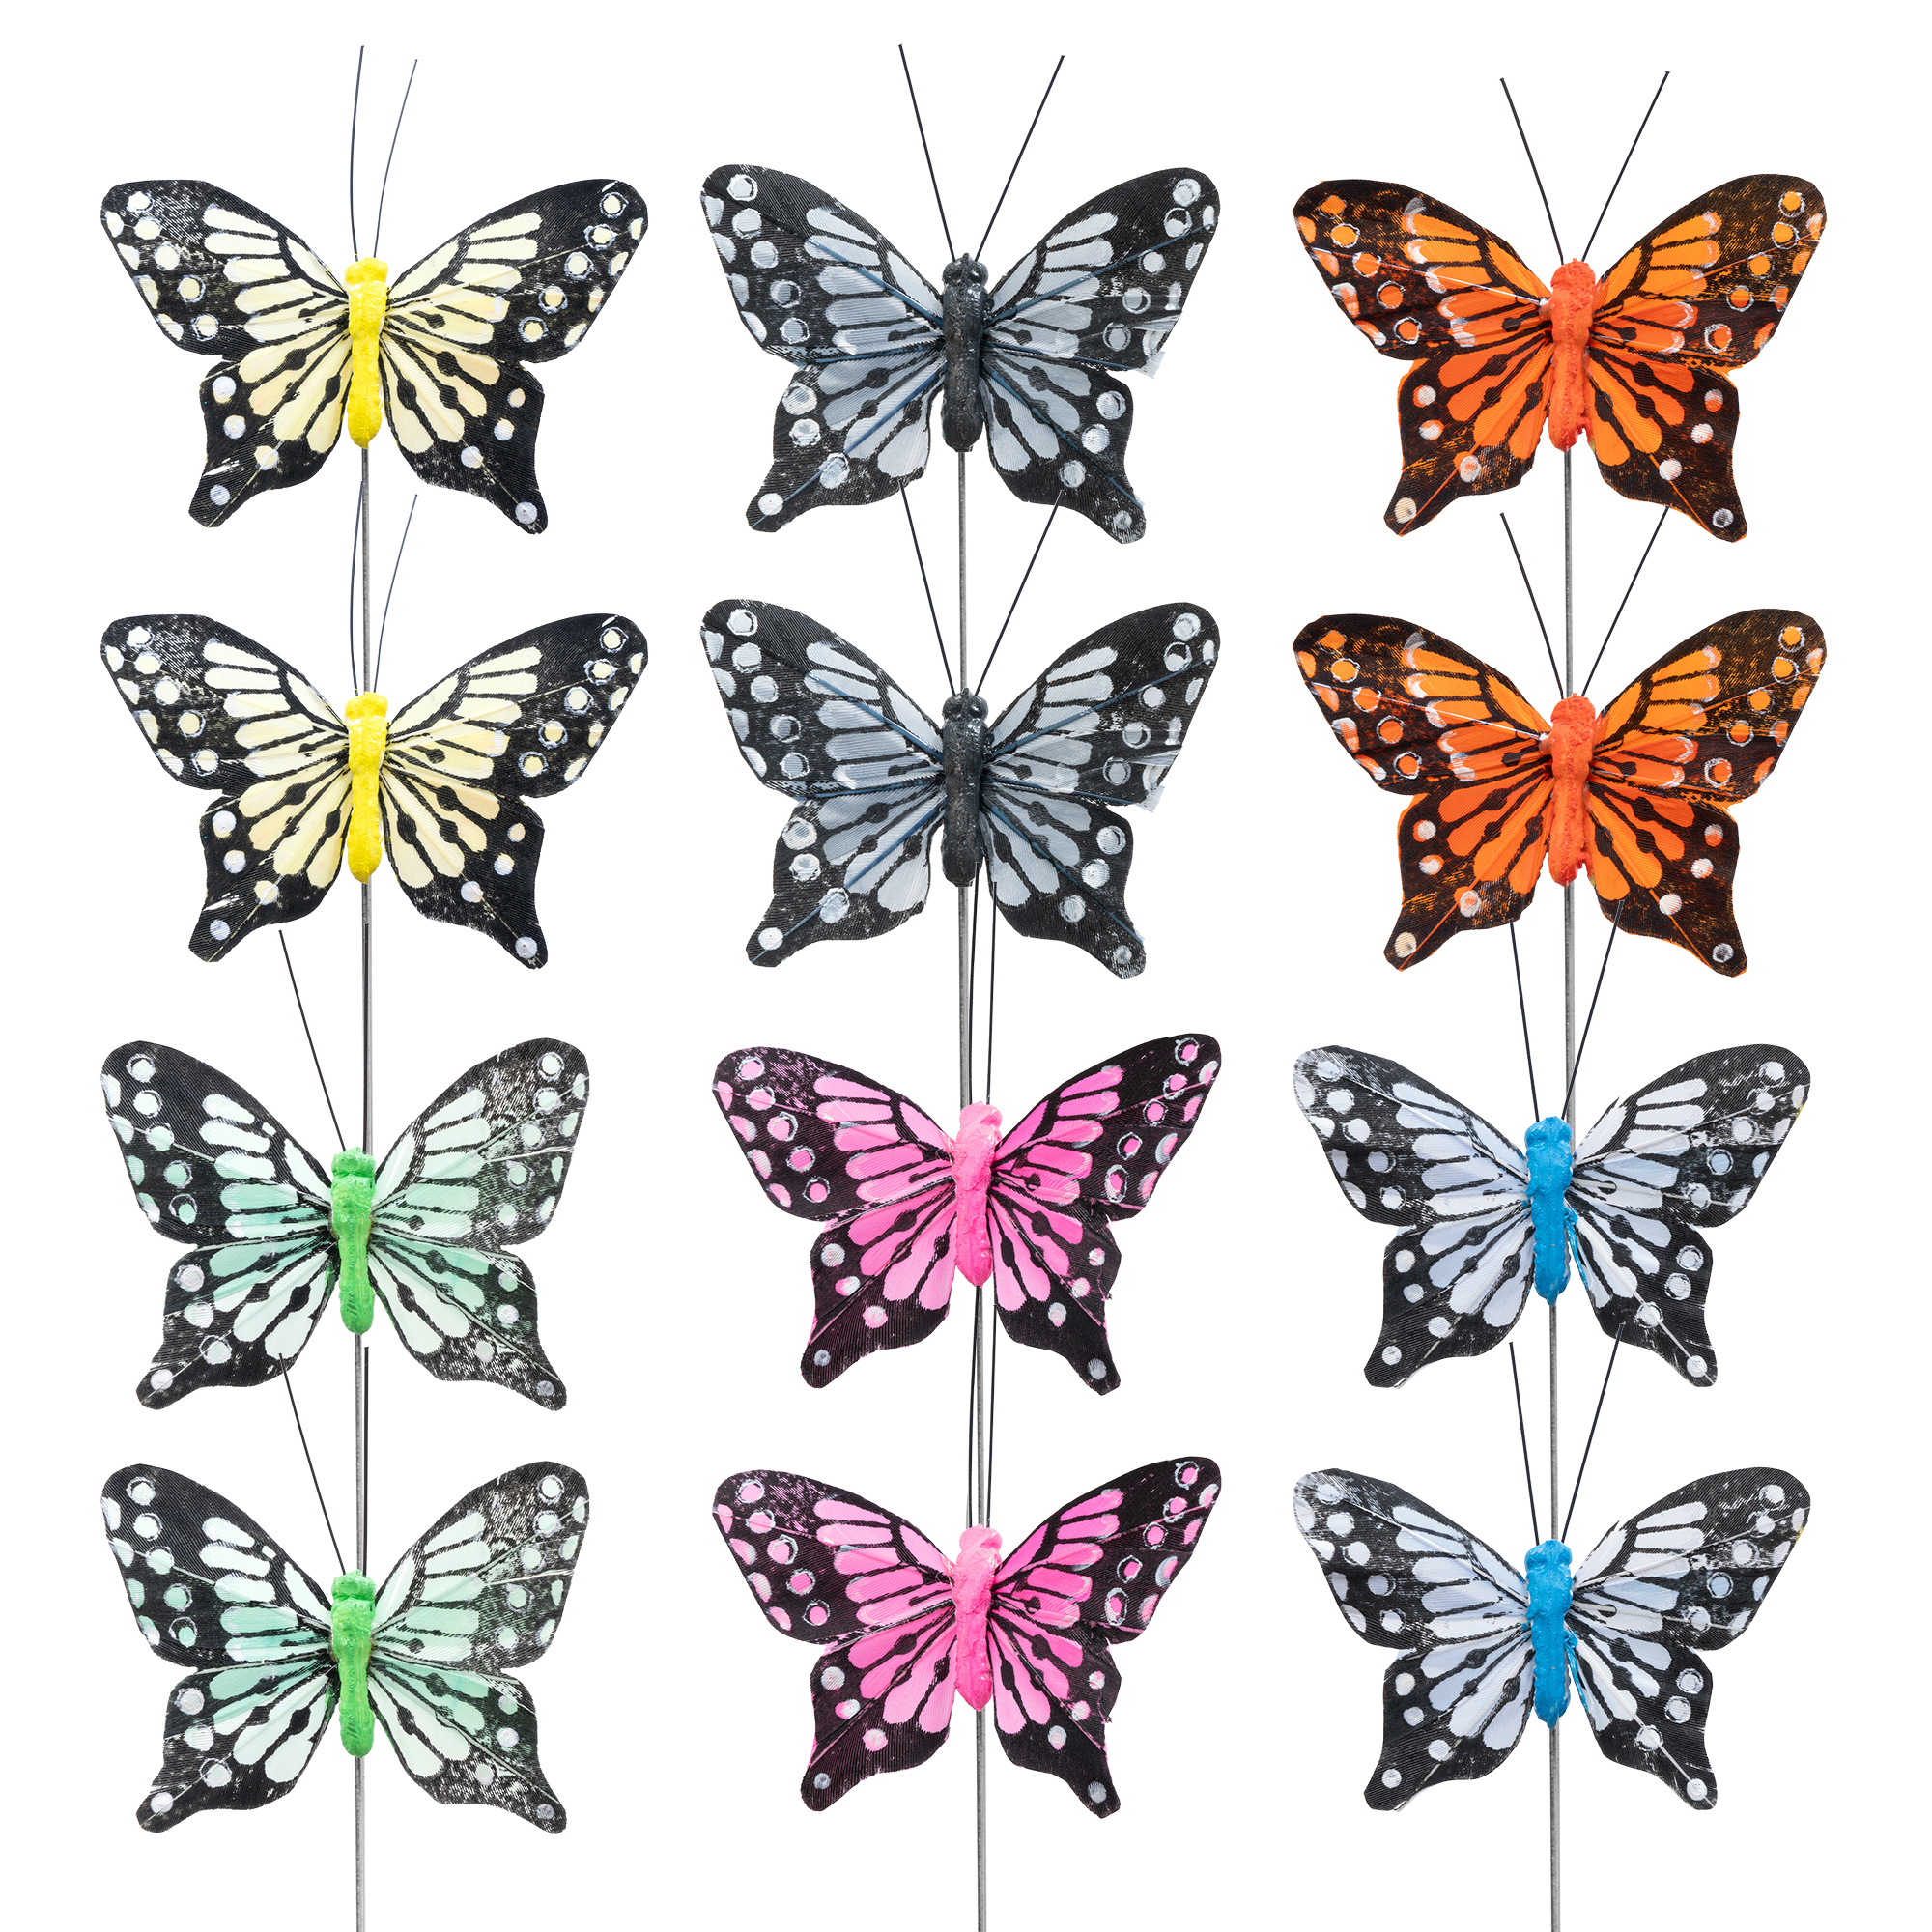 Feather Butterfly 3" 12pc/box - Assorted